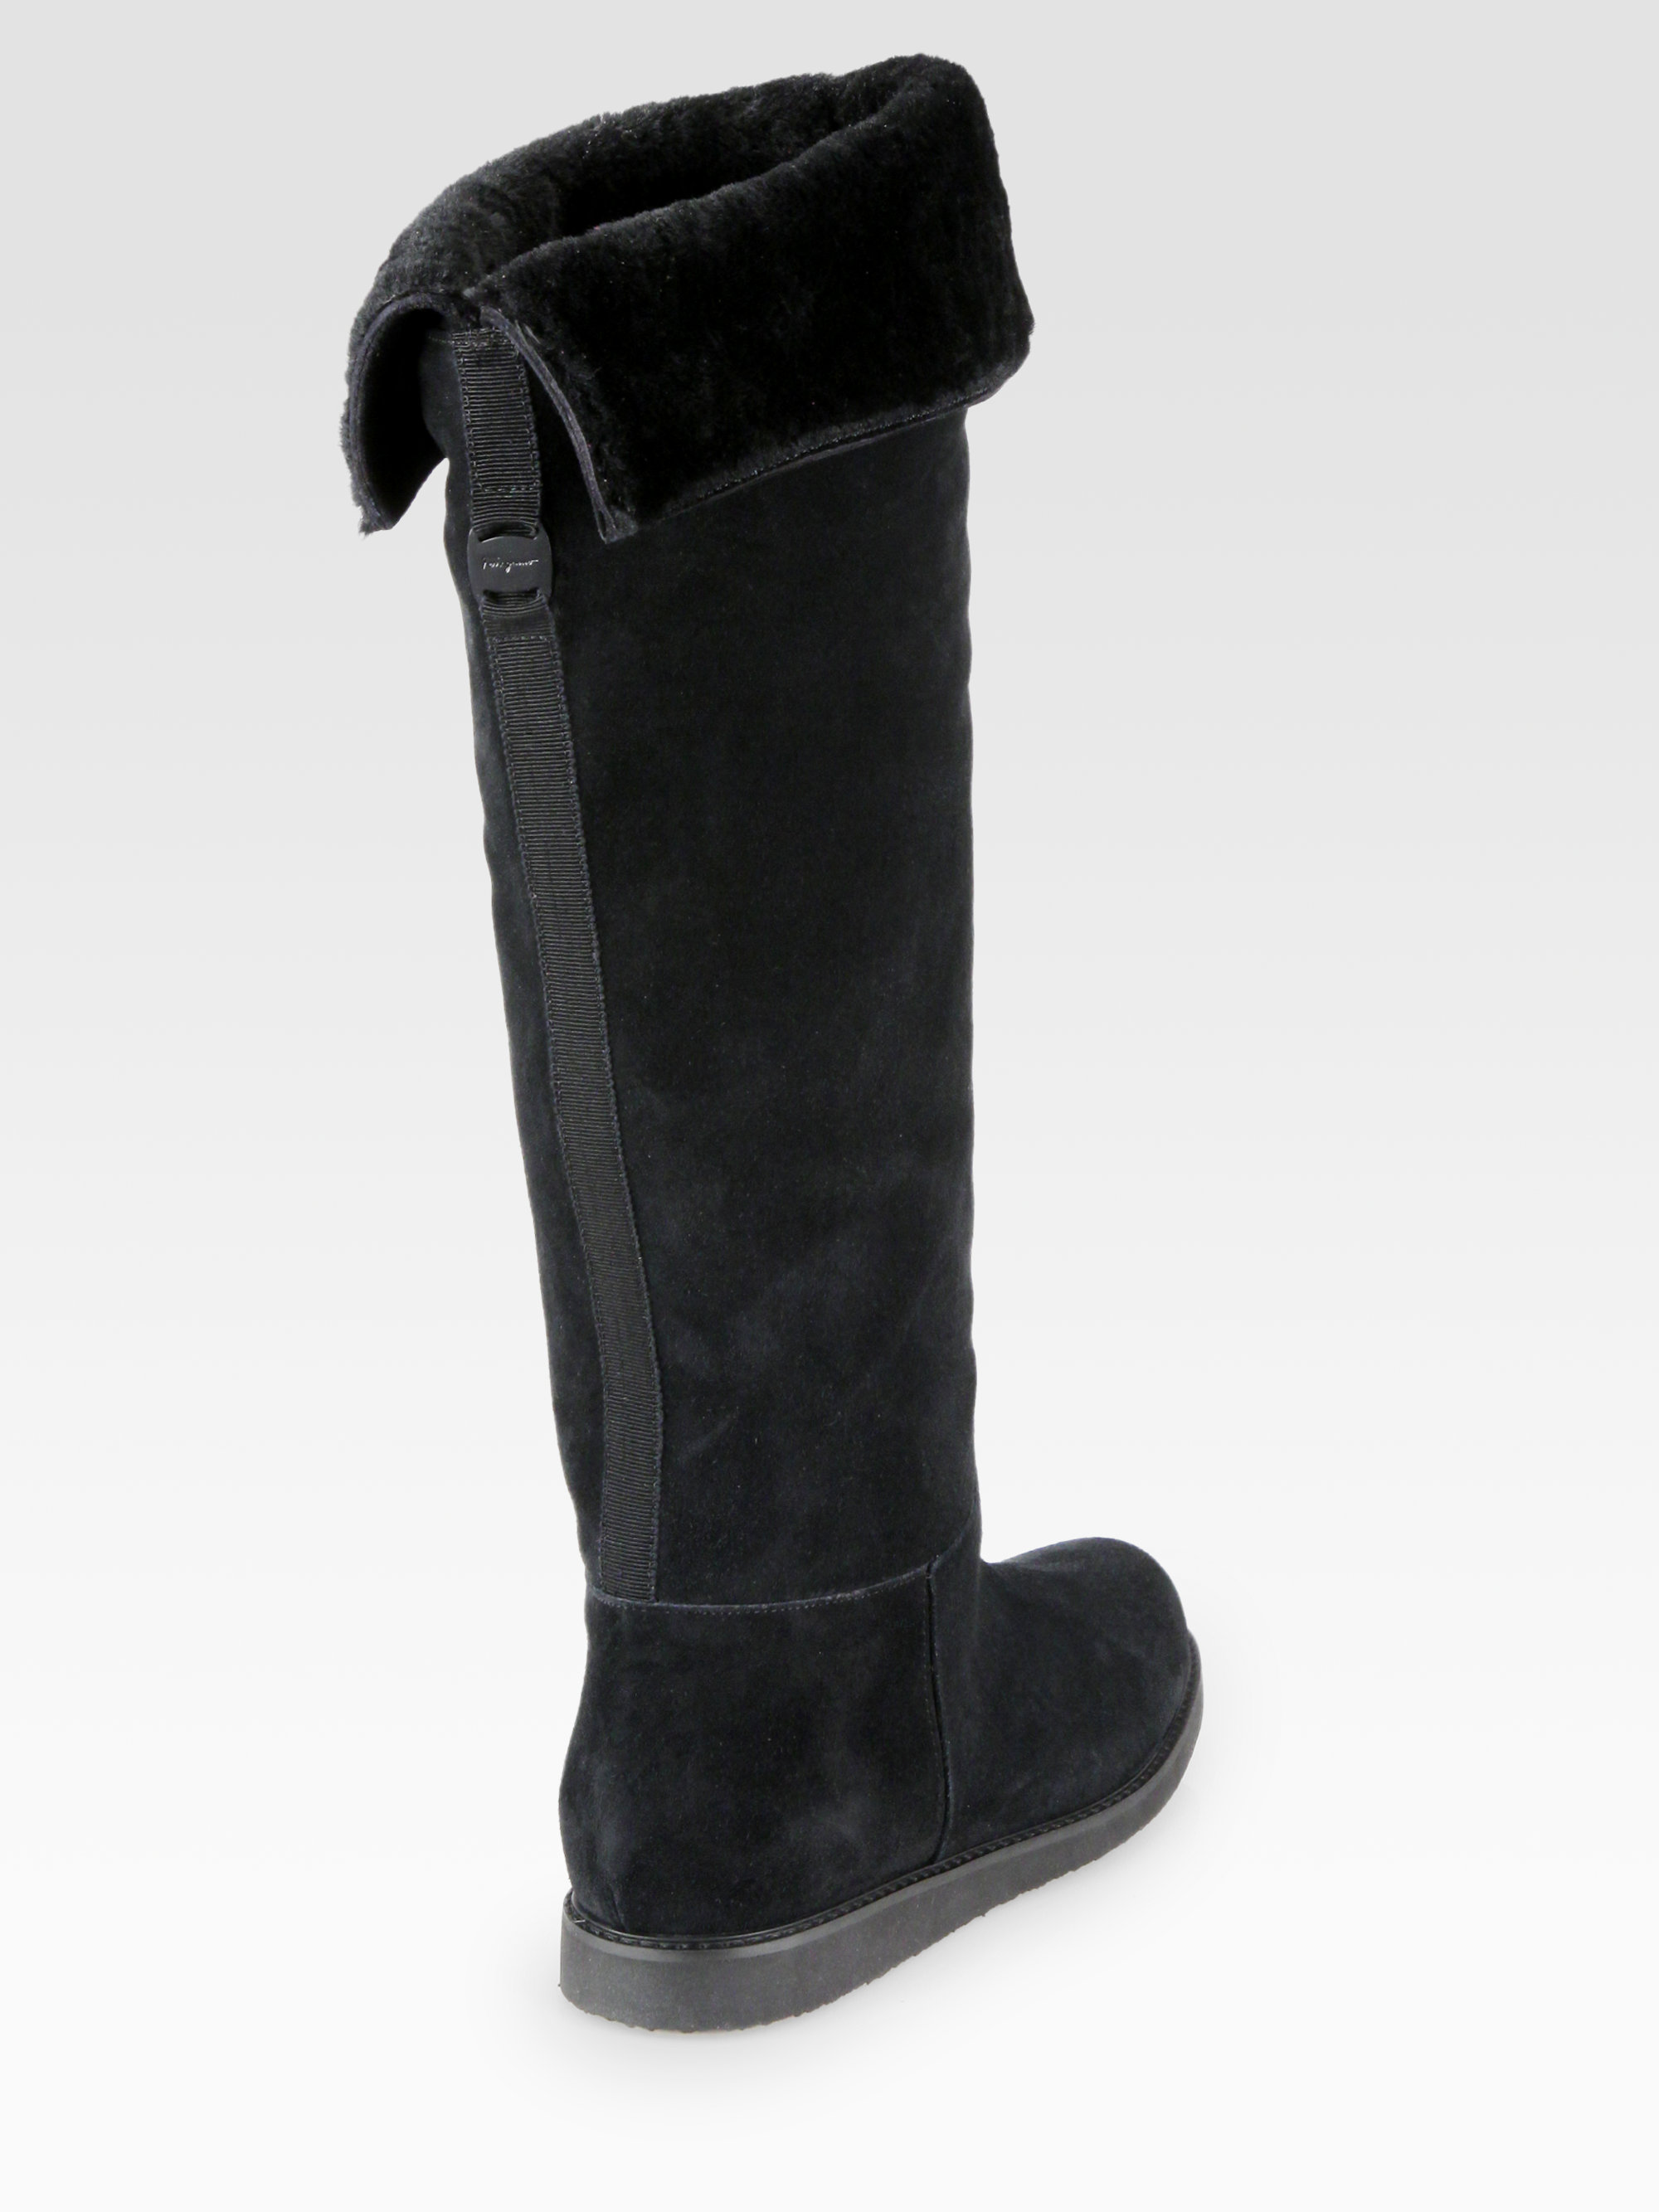 suede fur lined boots